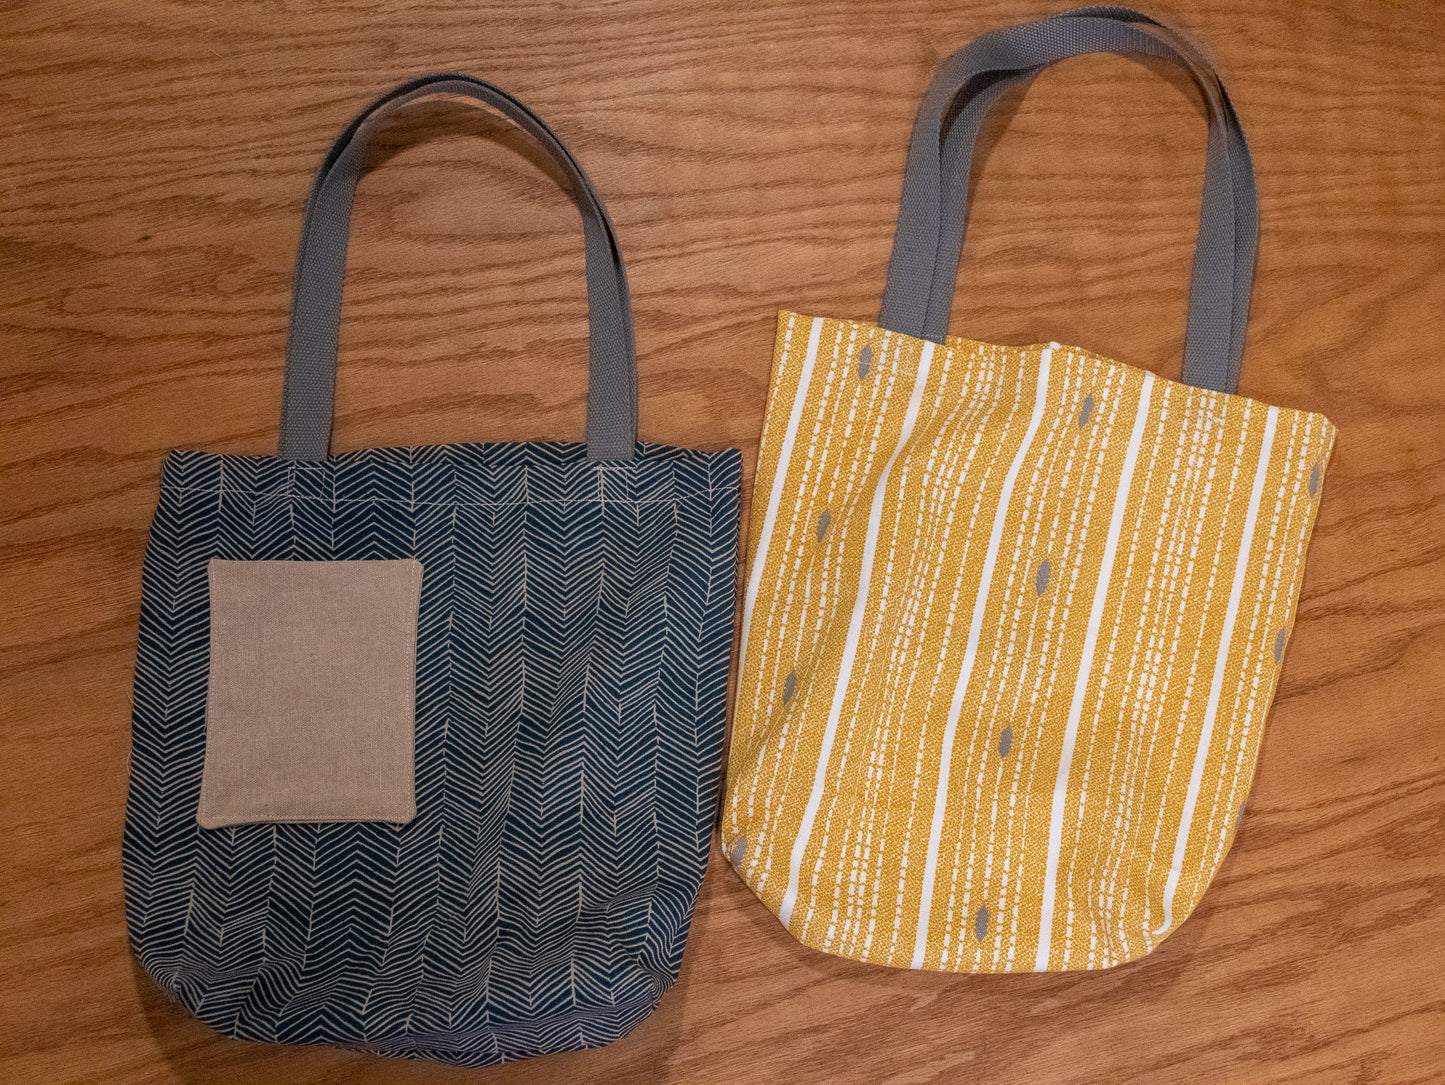 Image of blue and yellow Rivet Patterns Forte Tote Bags flat lays